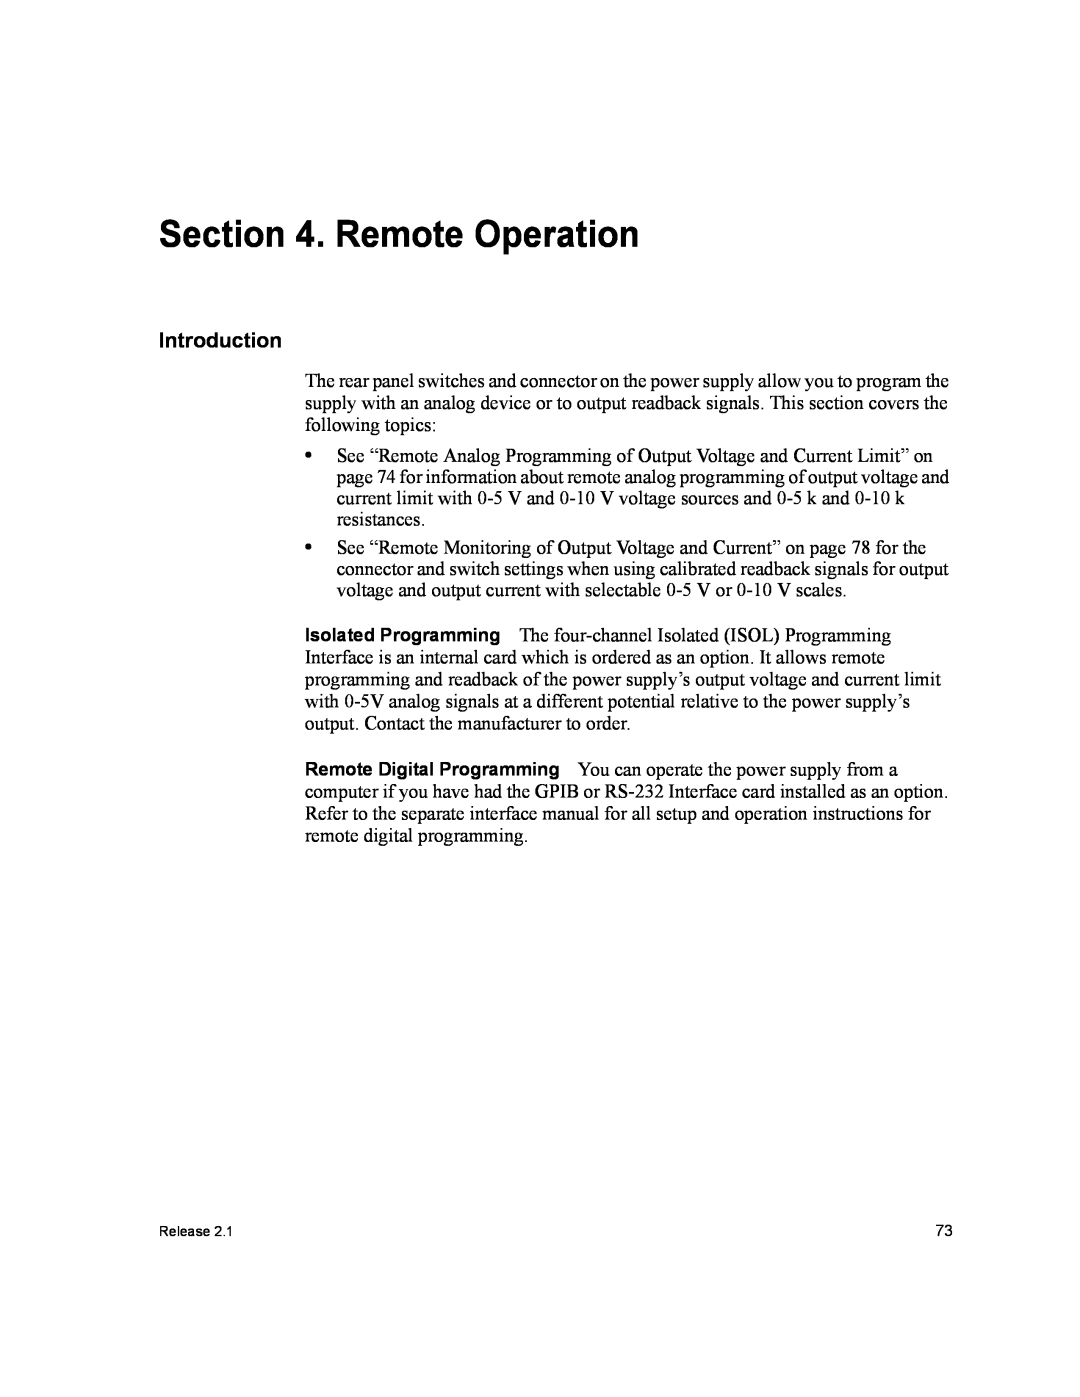 Xantrex Technology XFR 2800 manual Remote Operation, Introduction 